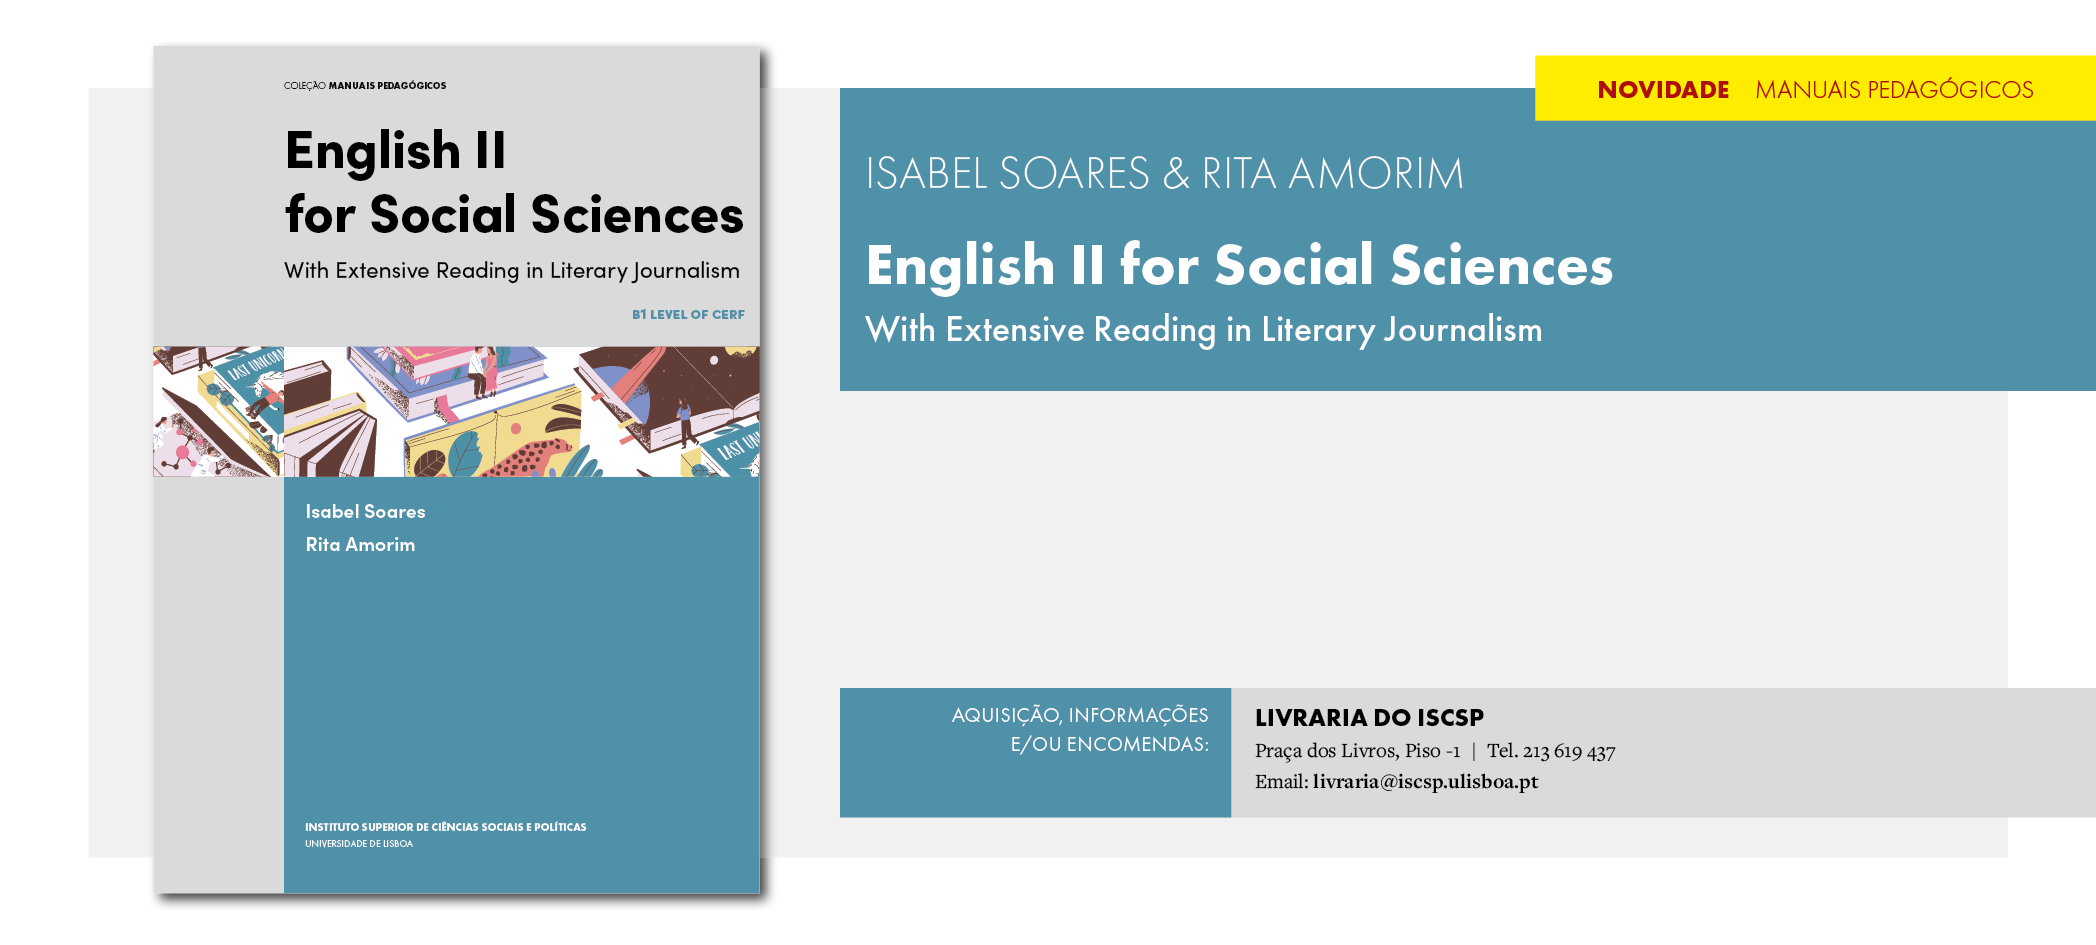 English II for Social Sciences